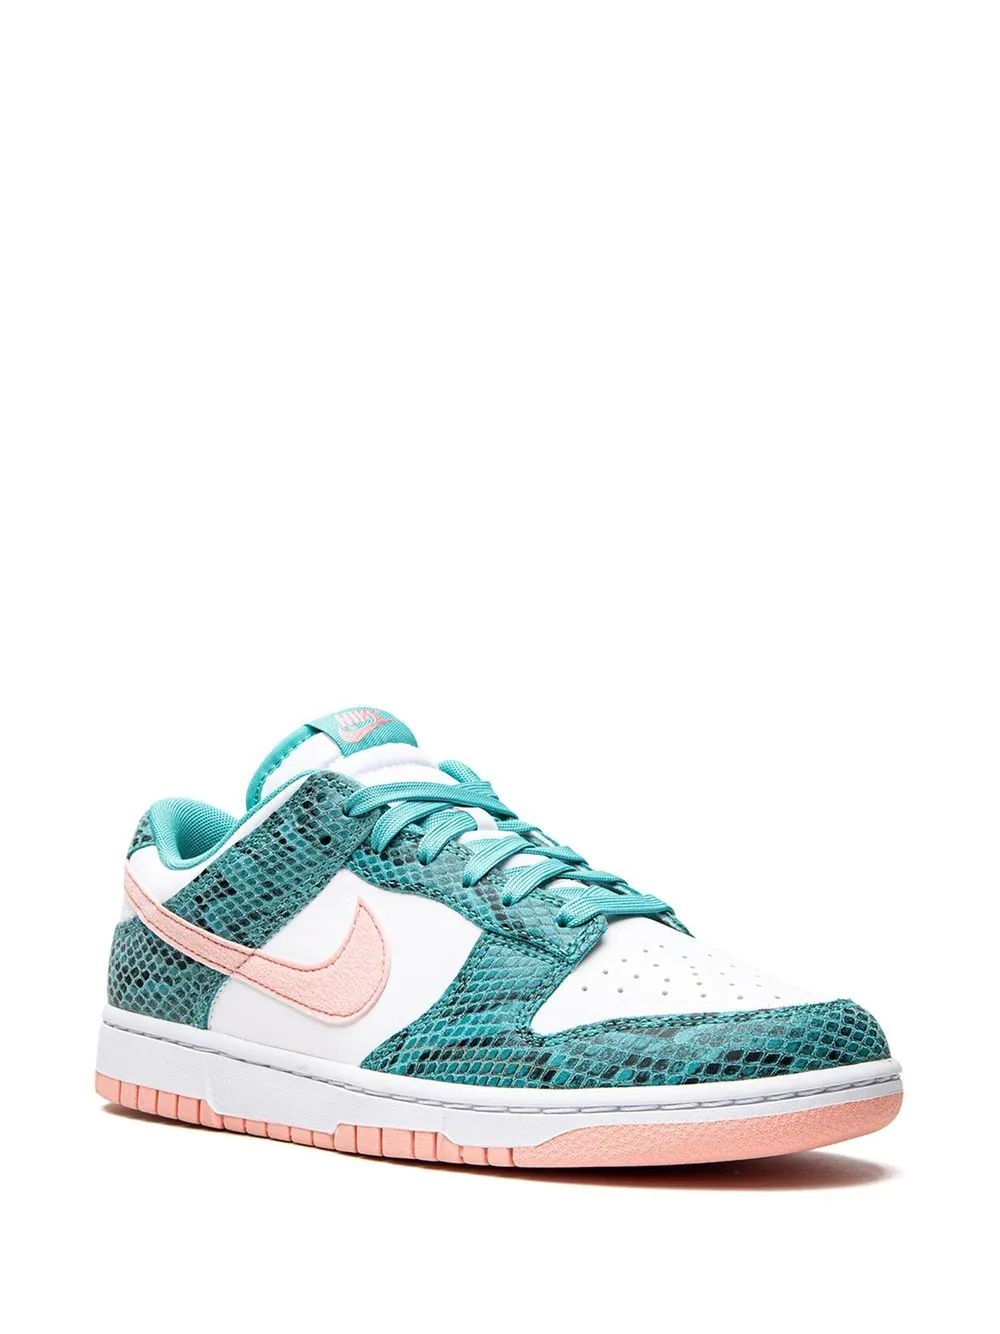 Dunk Low Snakeskin "Washed Teal/Bleached Coral" sneakers - 2